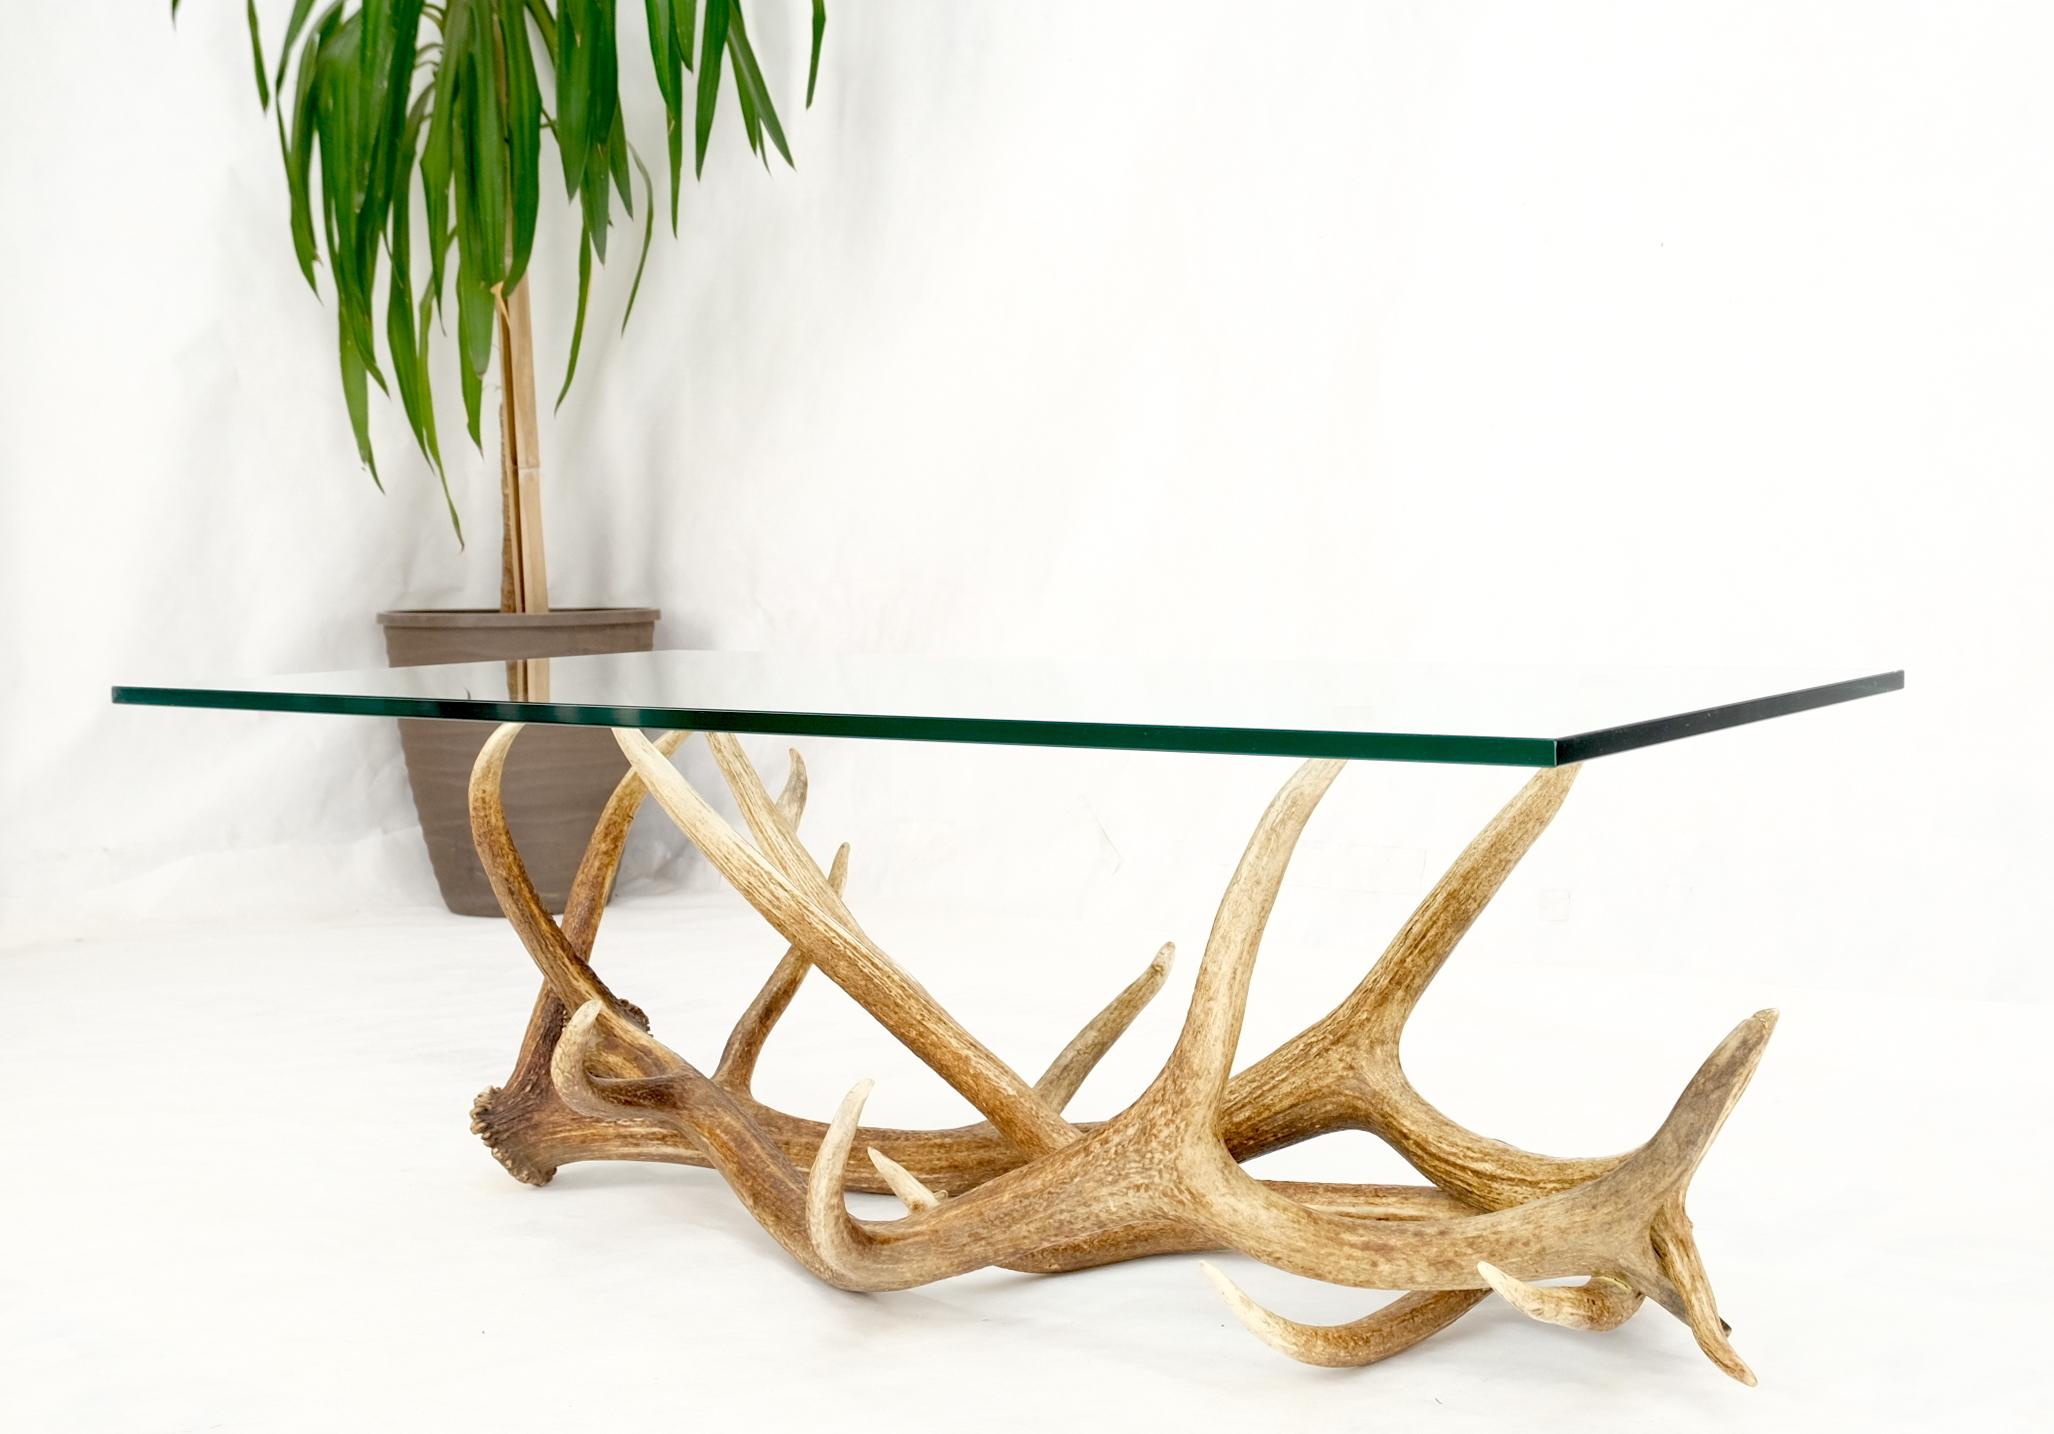 Antler Grouping Base Glass Rectangle Top Coffee Table Folk Art Mid Century Mod For Sale 5